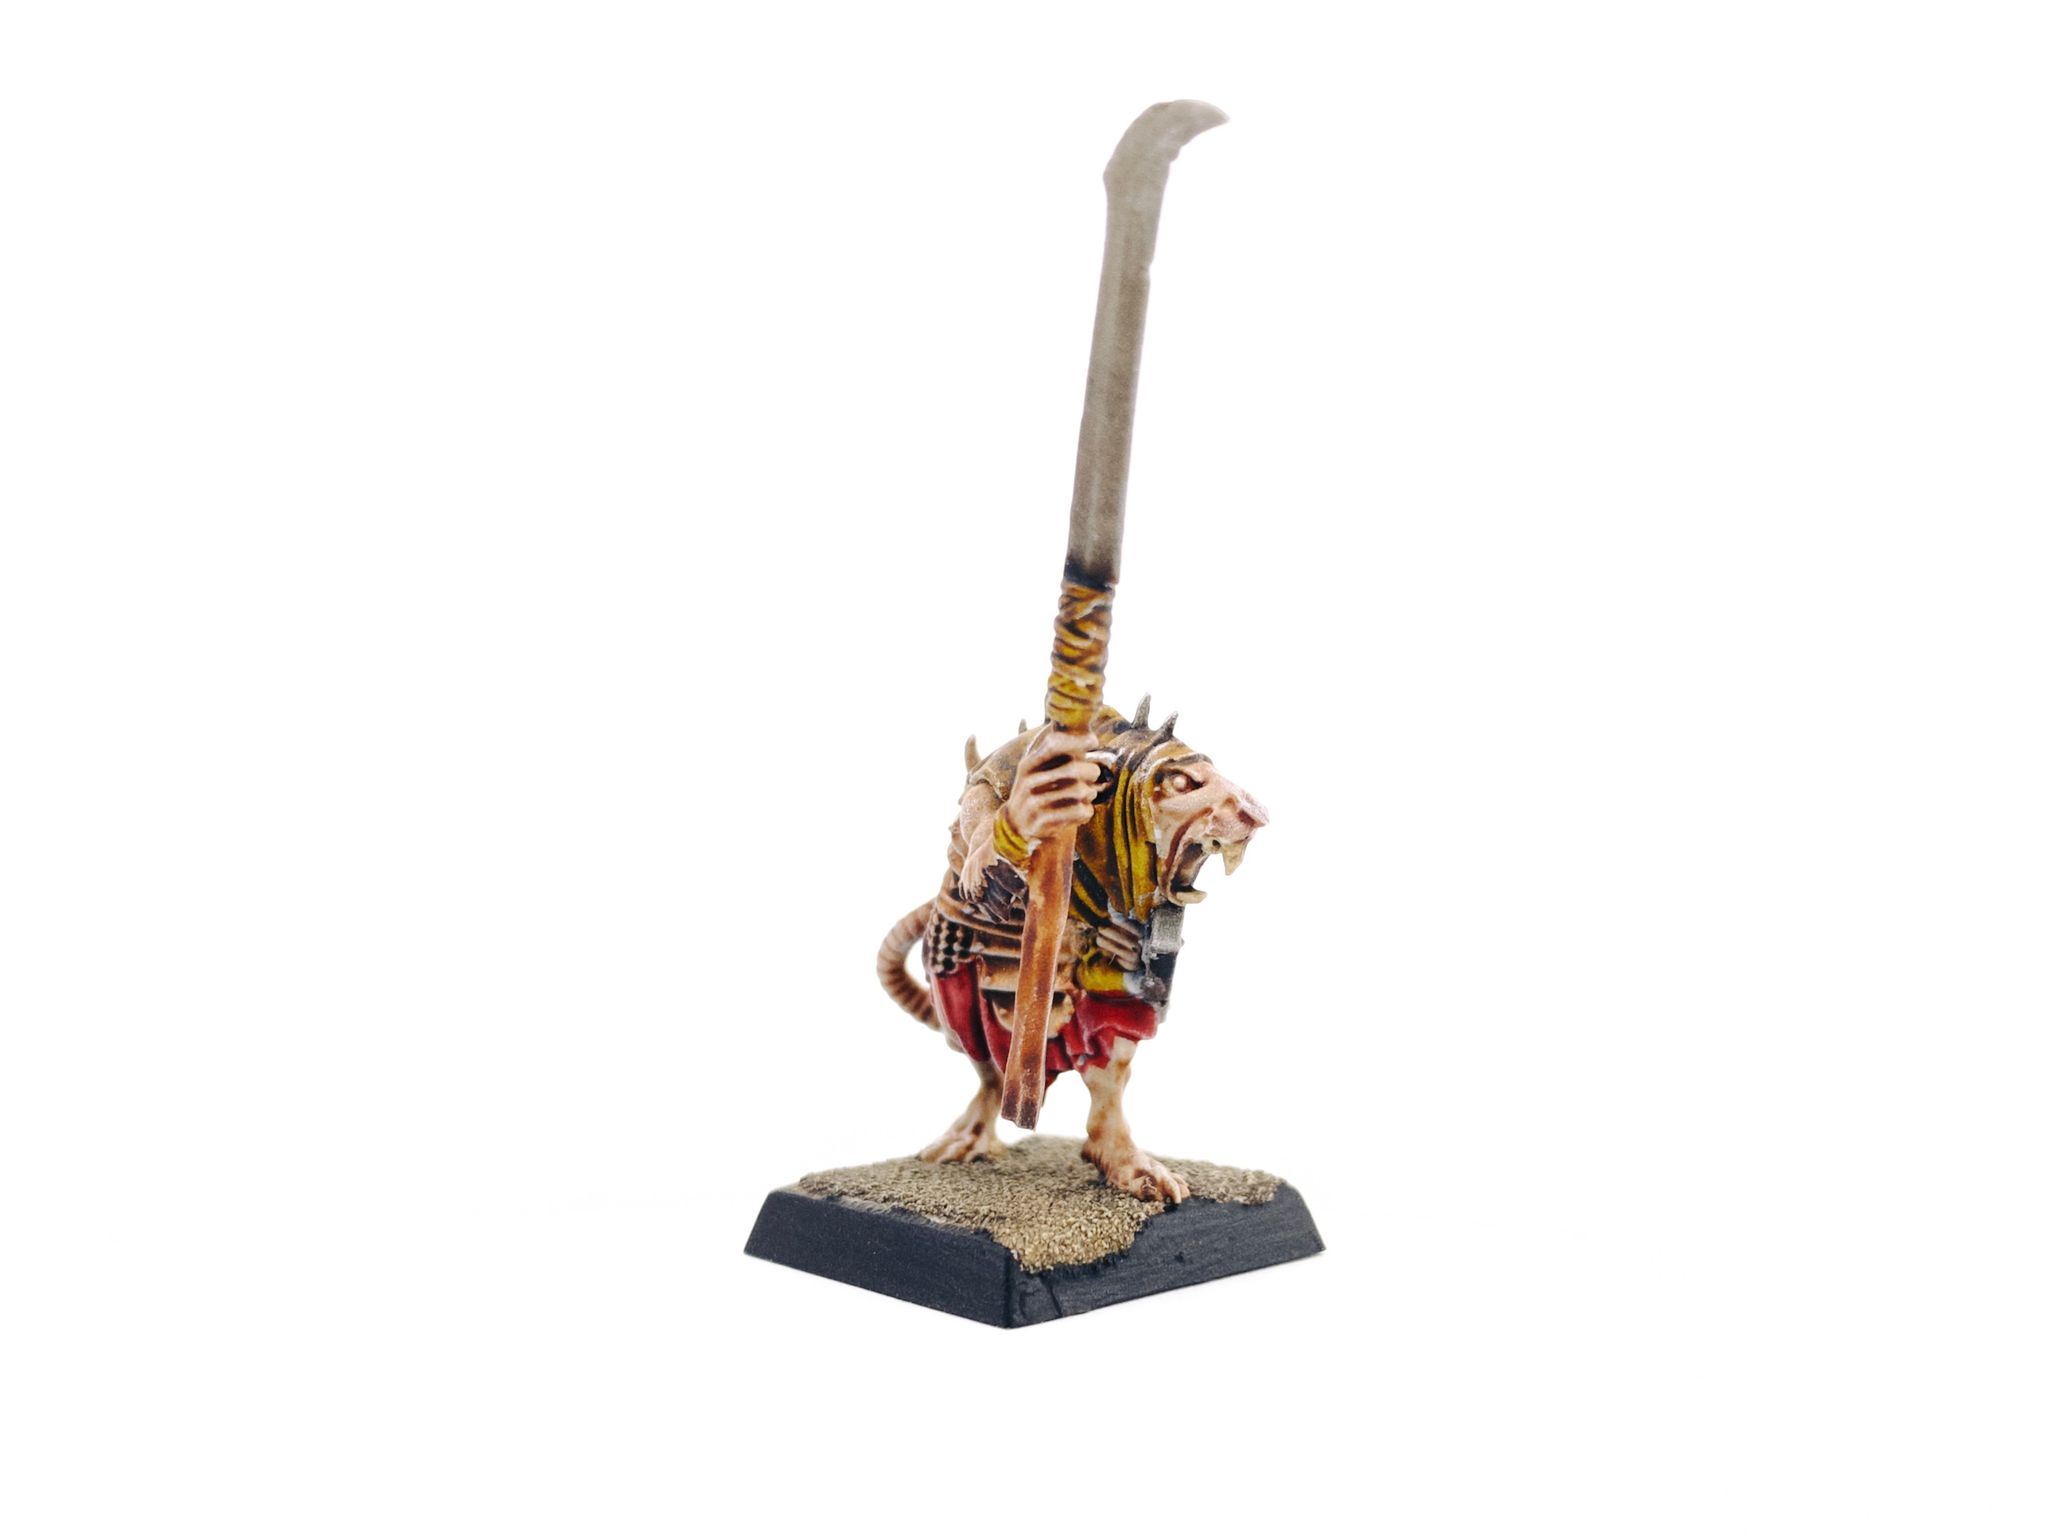 A photo of a rank-and-file Skaven from the old 8th Edition Warhammer box. It's small hunched-over but humanoid rat creature with a leather head/shoulder covering, red cloth underneath copper-coloured armor, and brandishing a very tall not-quite-scythe.